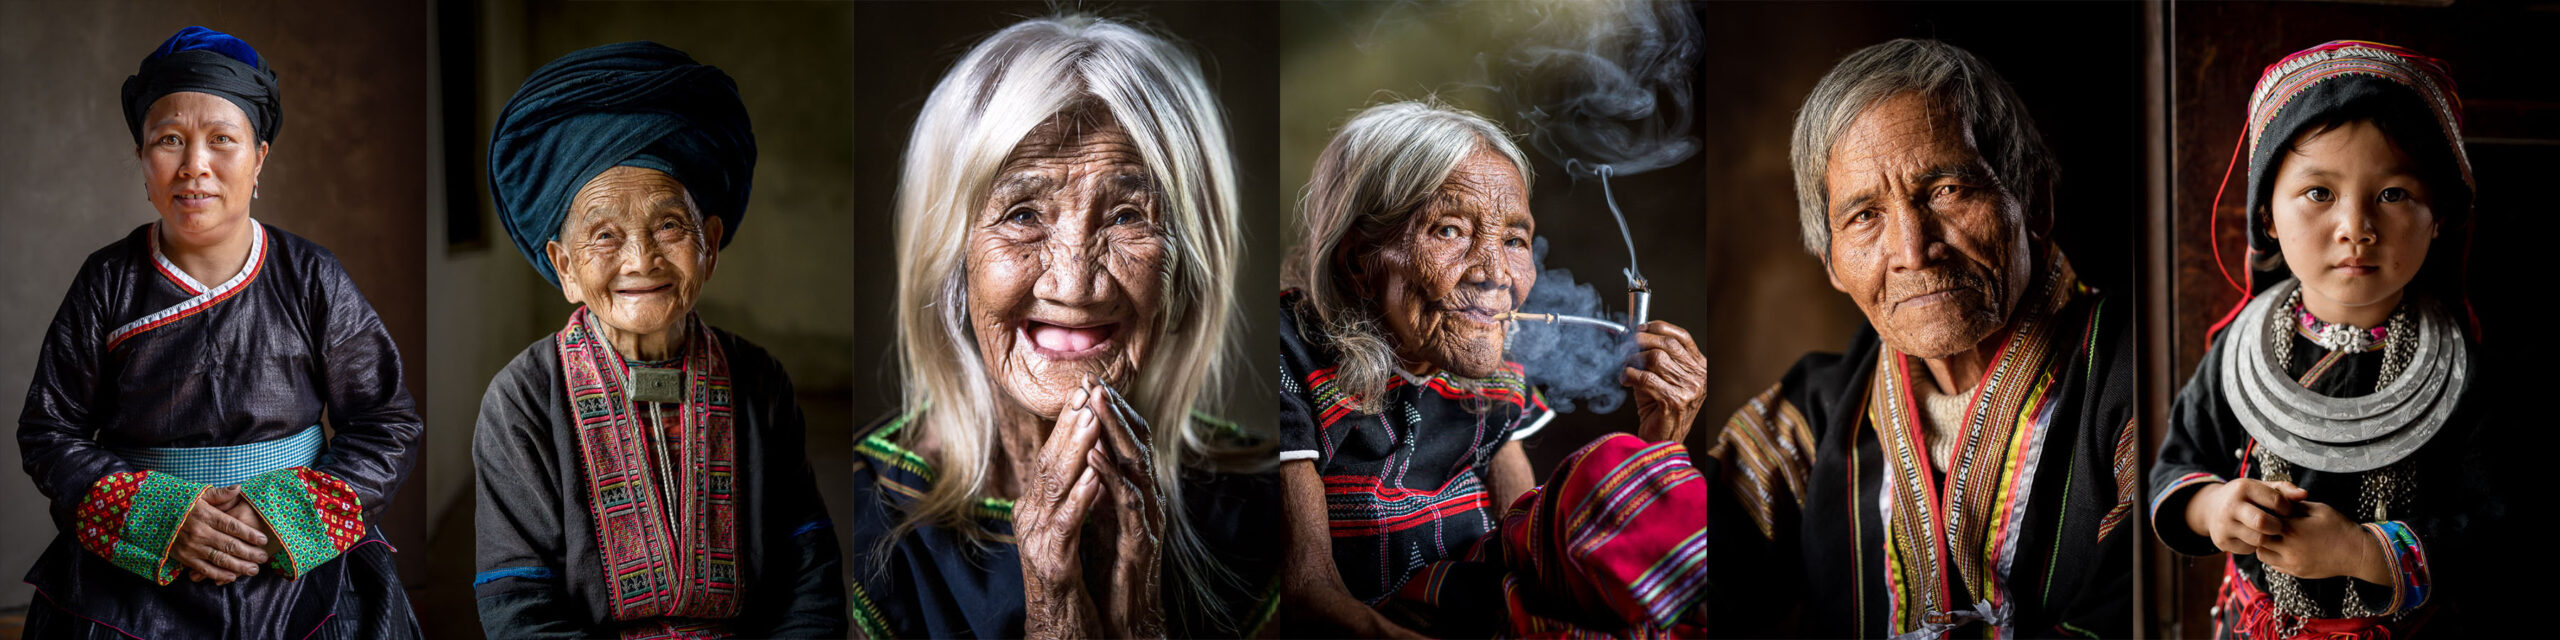 Hill Tribes of Vietnam Portrait Photography